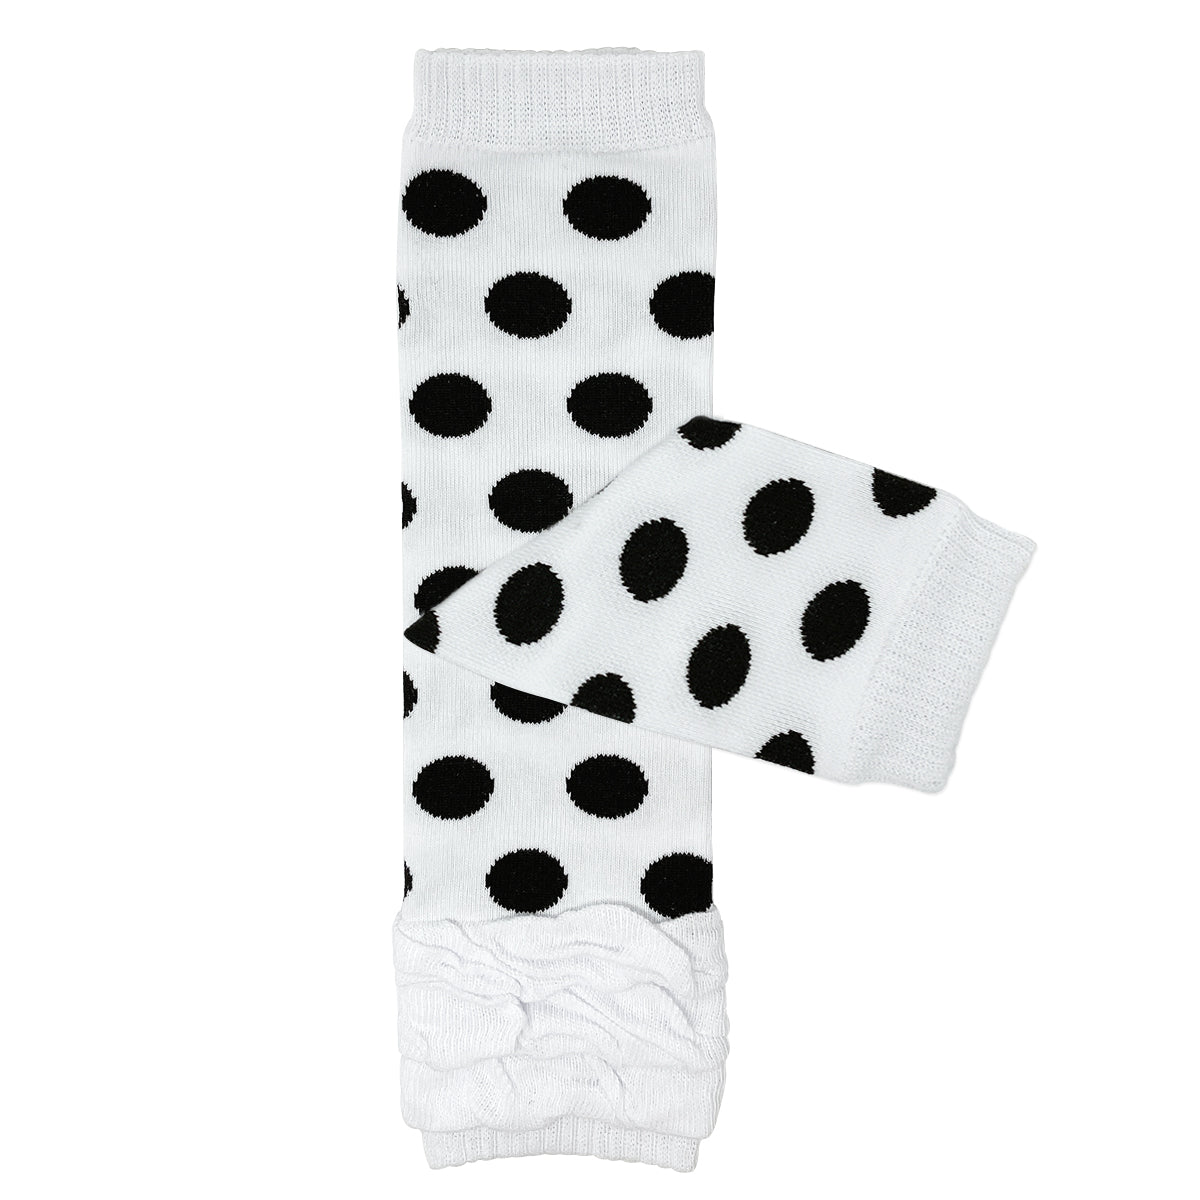 Wrapables Ruched and Dots Baby Leg Warmers